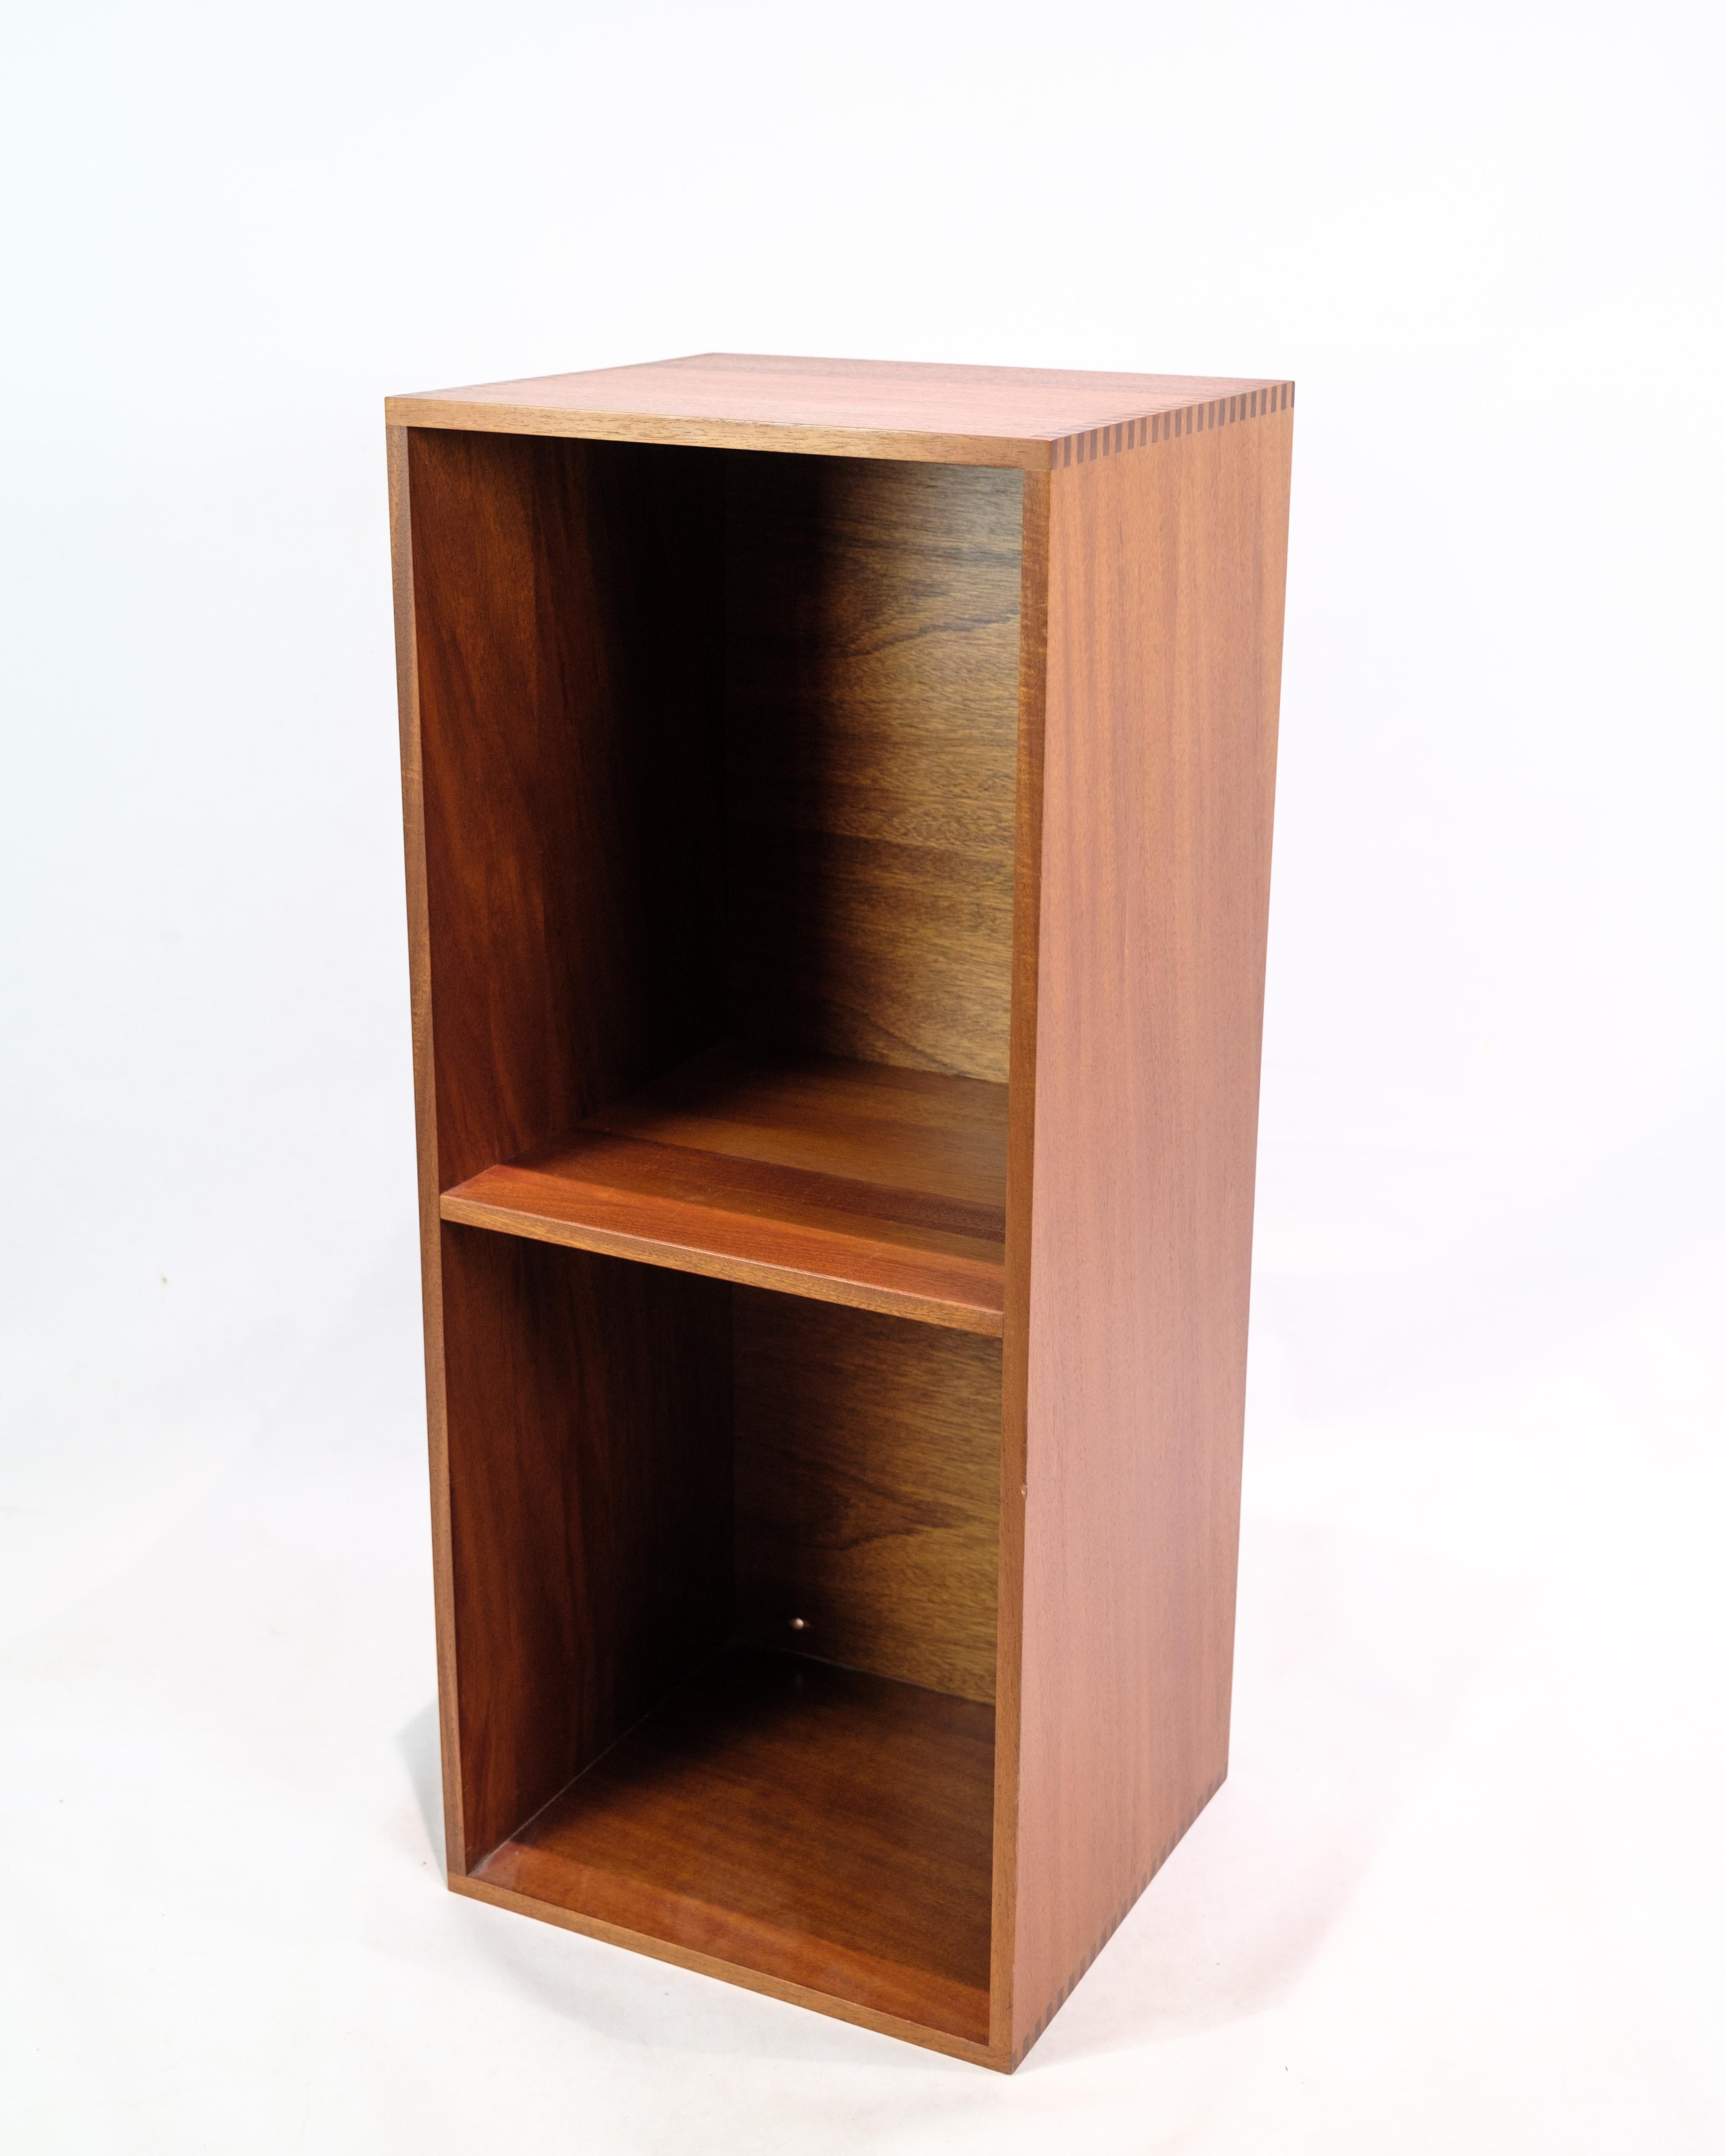 This bookcase with shelf is an example of Danish design from the 1960s, made of teak wood. It represents an era in which Danish furniture design flourished and gained international recognition for its simplicity, functionality and high quality.